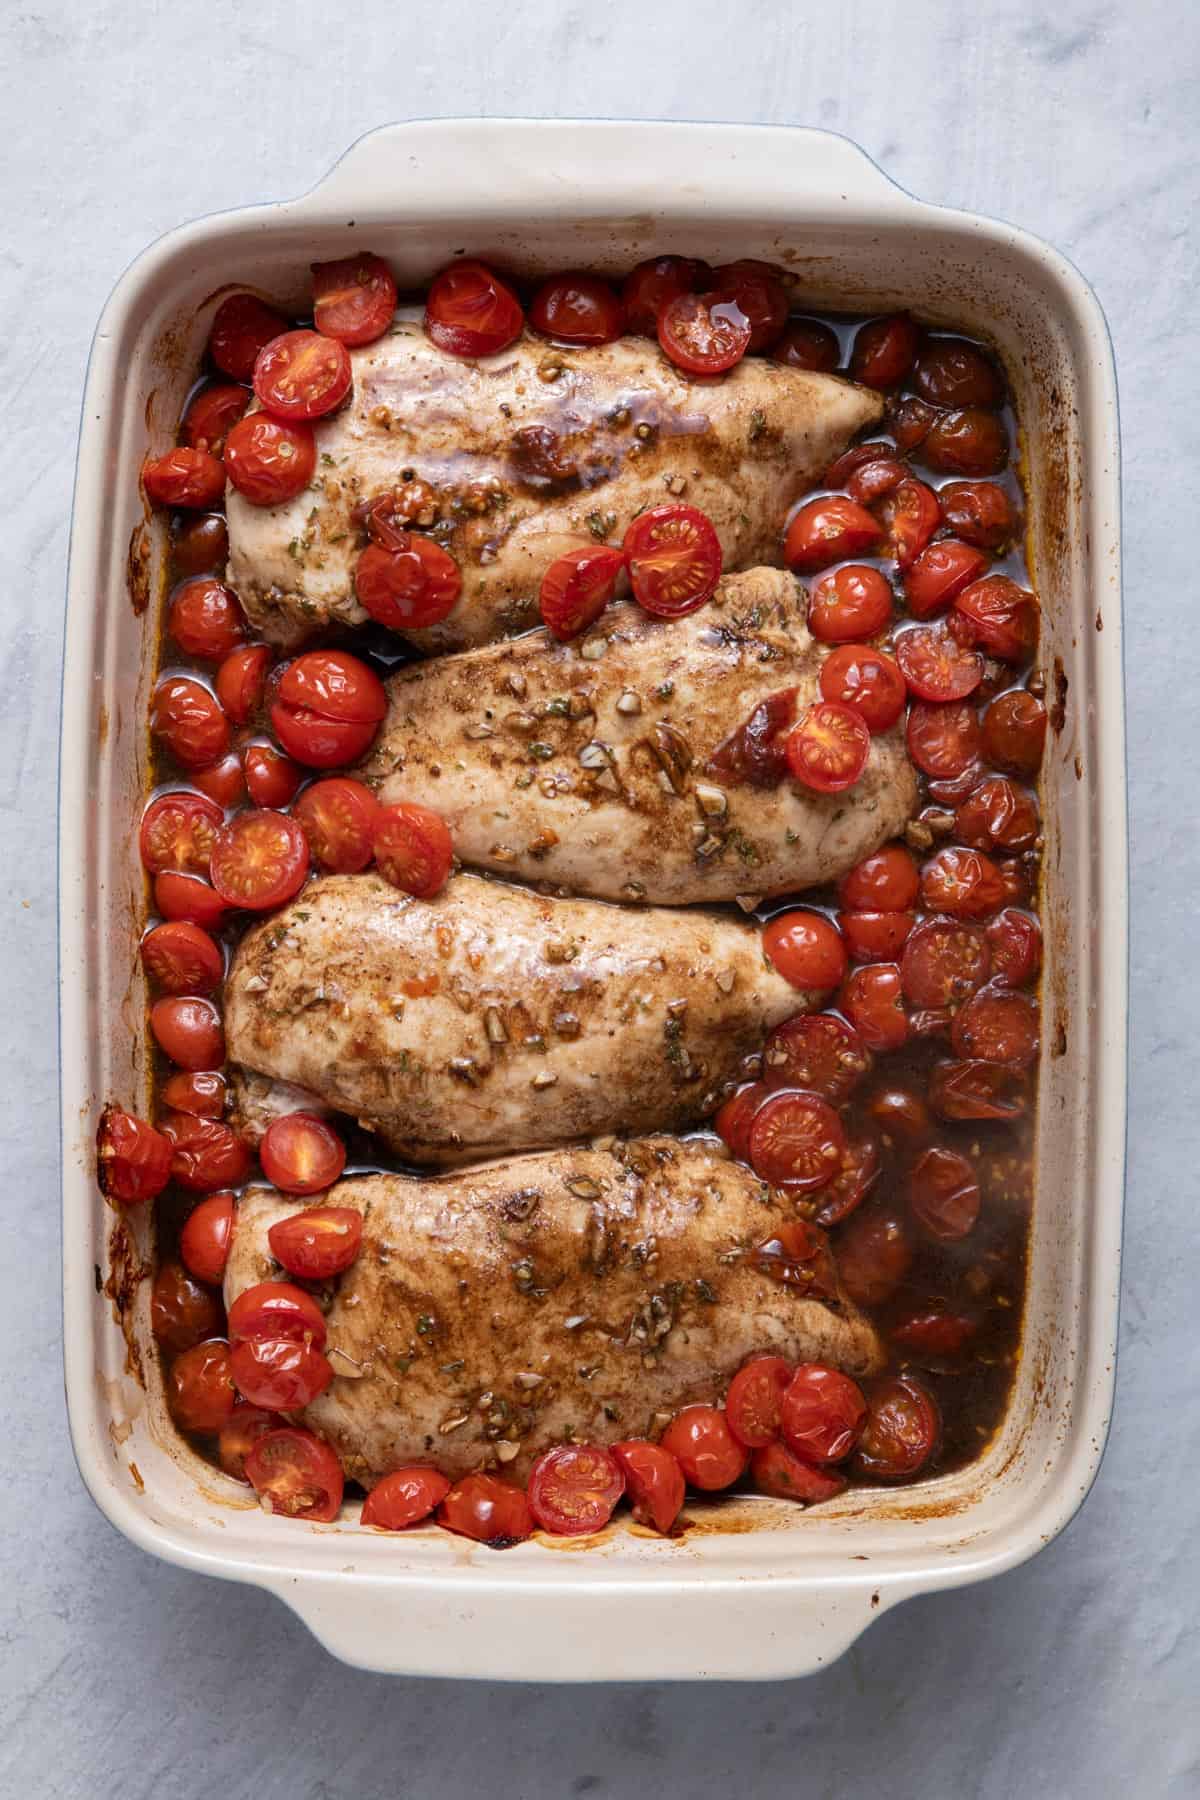 Final baked chicken with tomatoes after baking